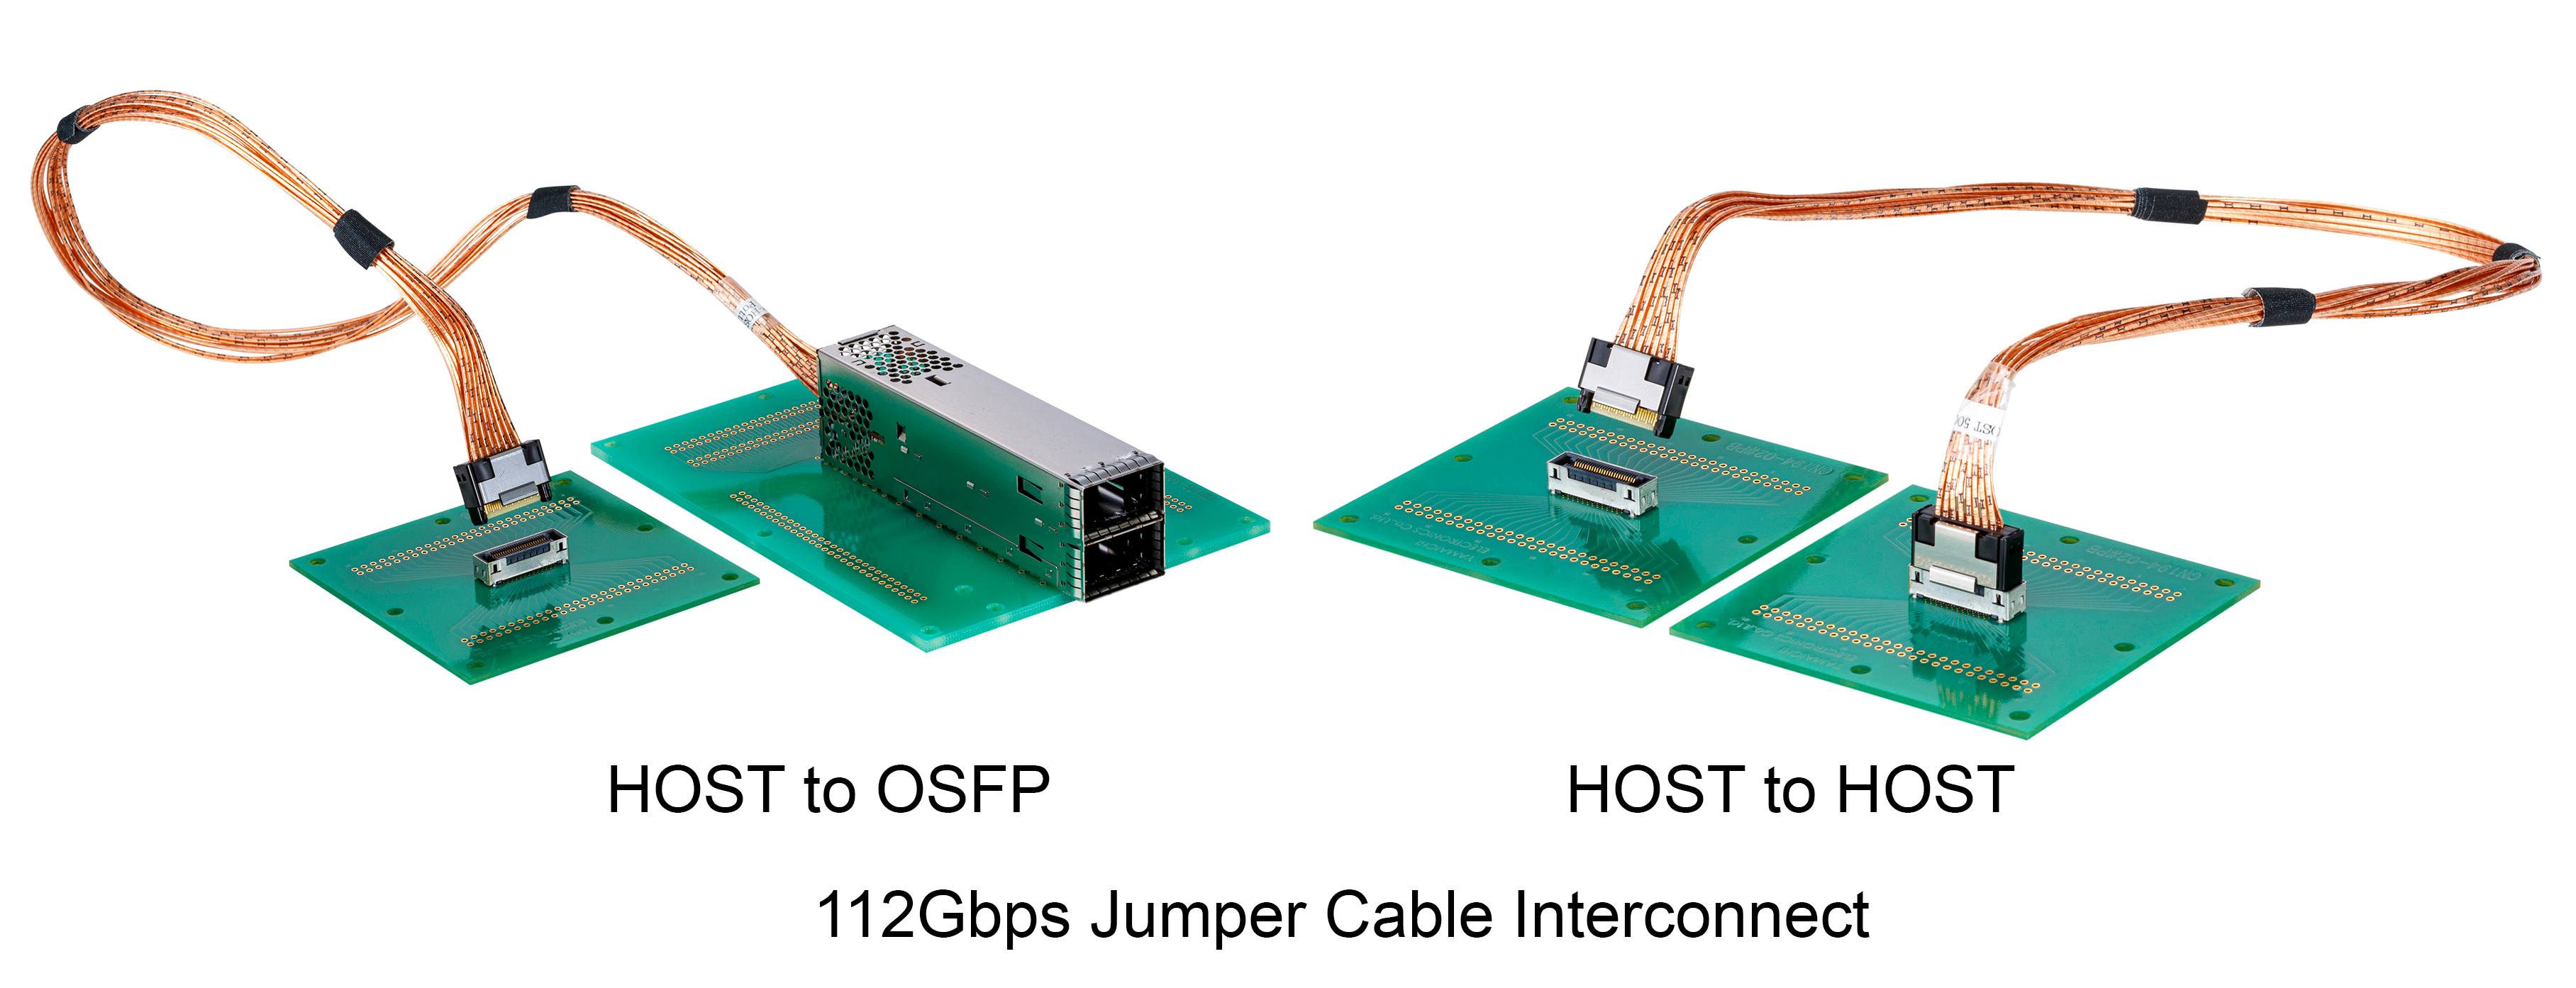 Jumper Cable Interconnect Product